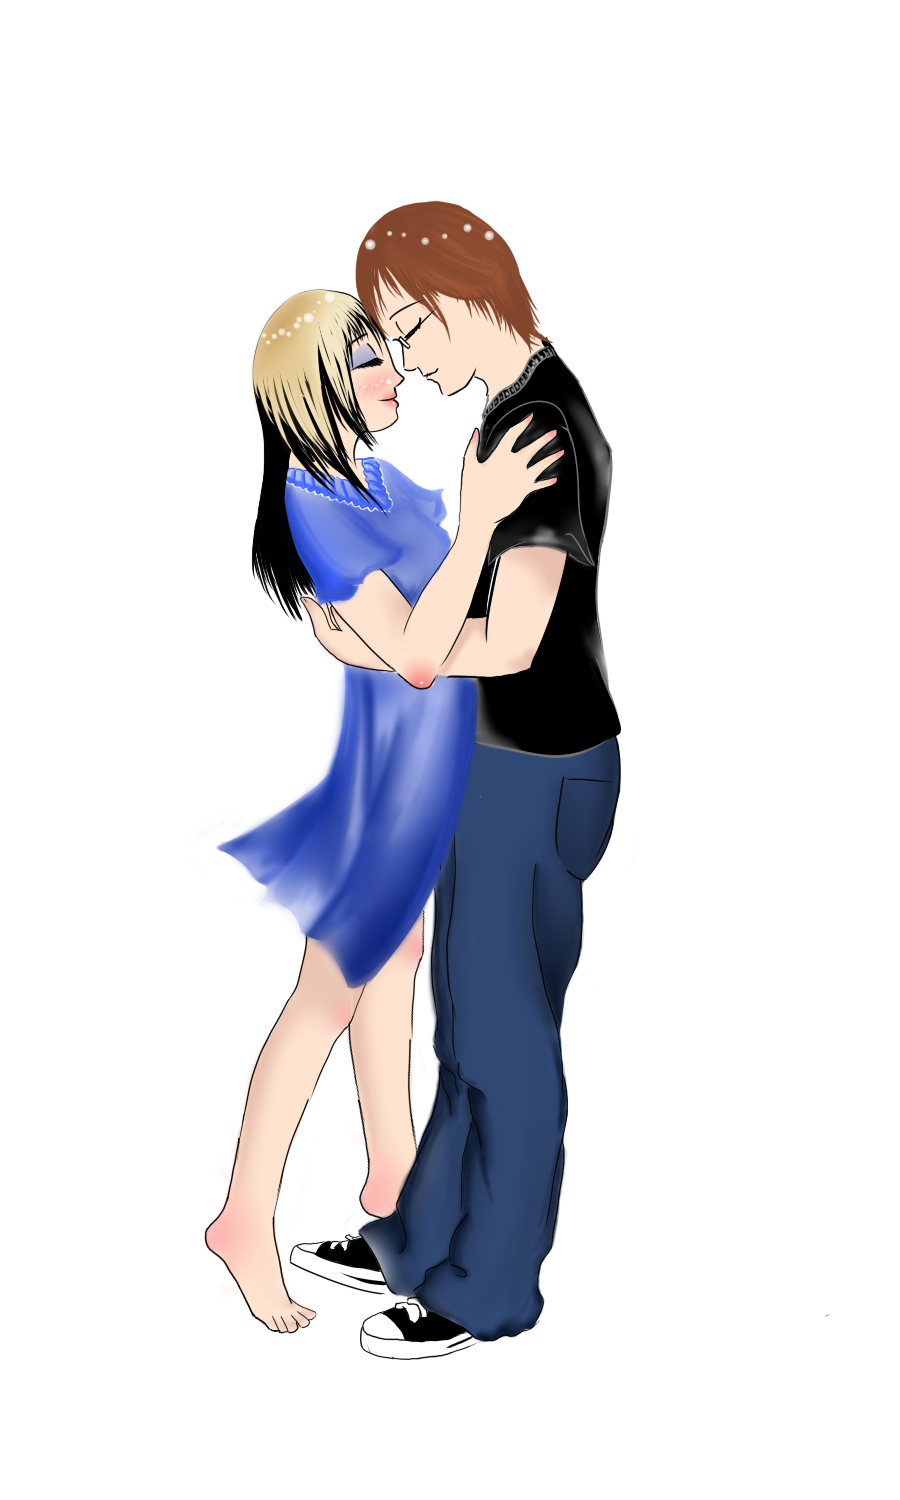 Animated Couple Hugging - ClipArt Best